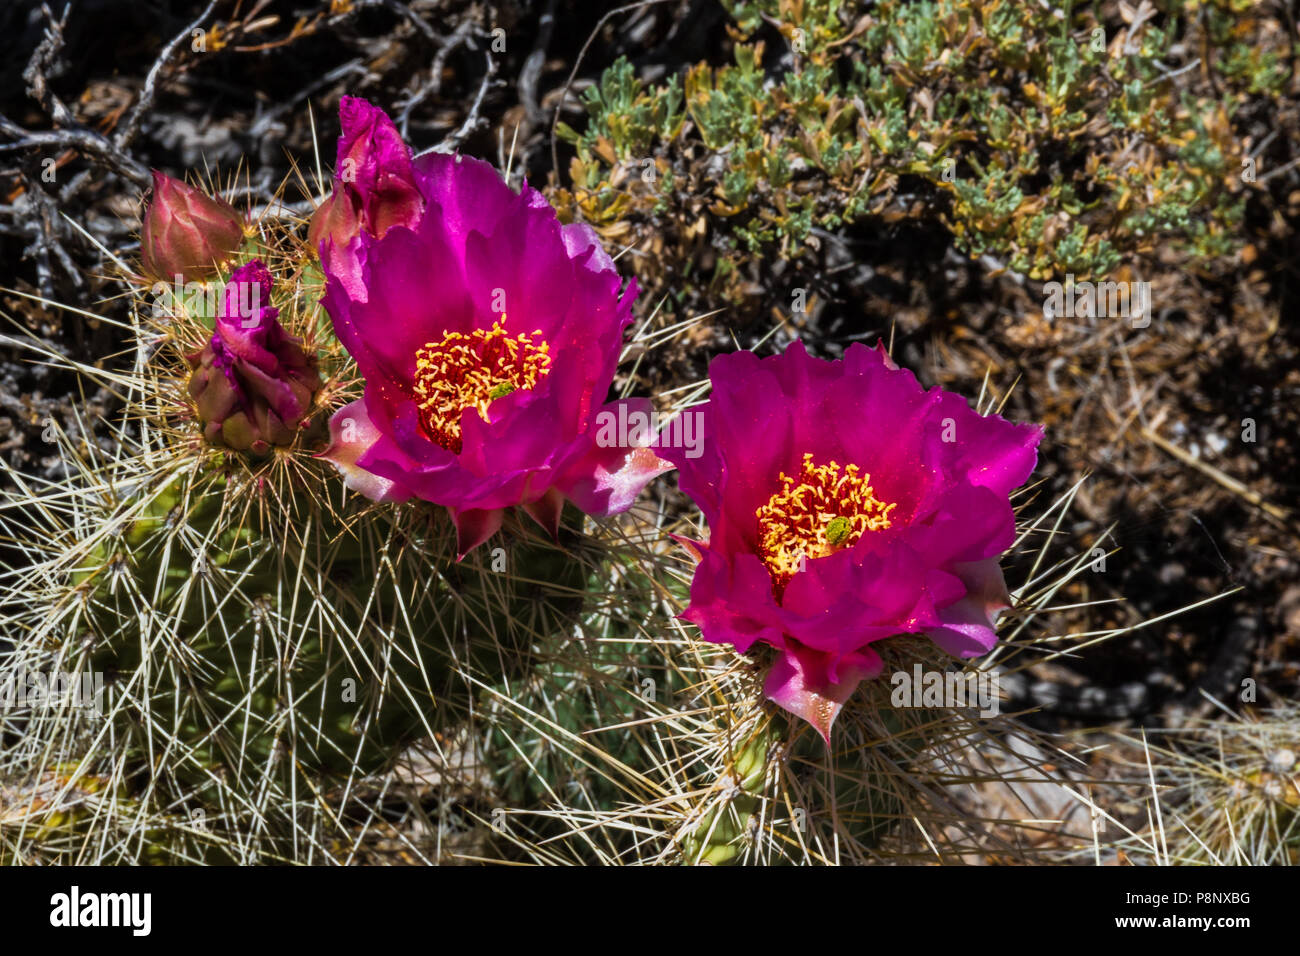 Pair of brilliant pink blossoms on a prickly pear cactus near the South Rim of the Grand Canyon in Arizona. Stock Photo